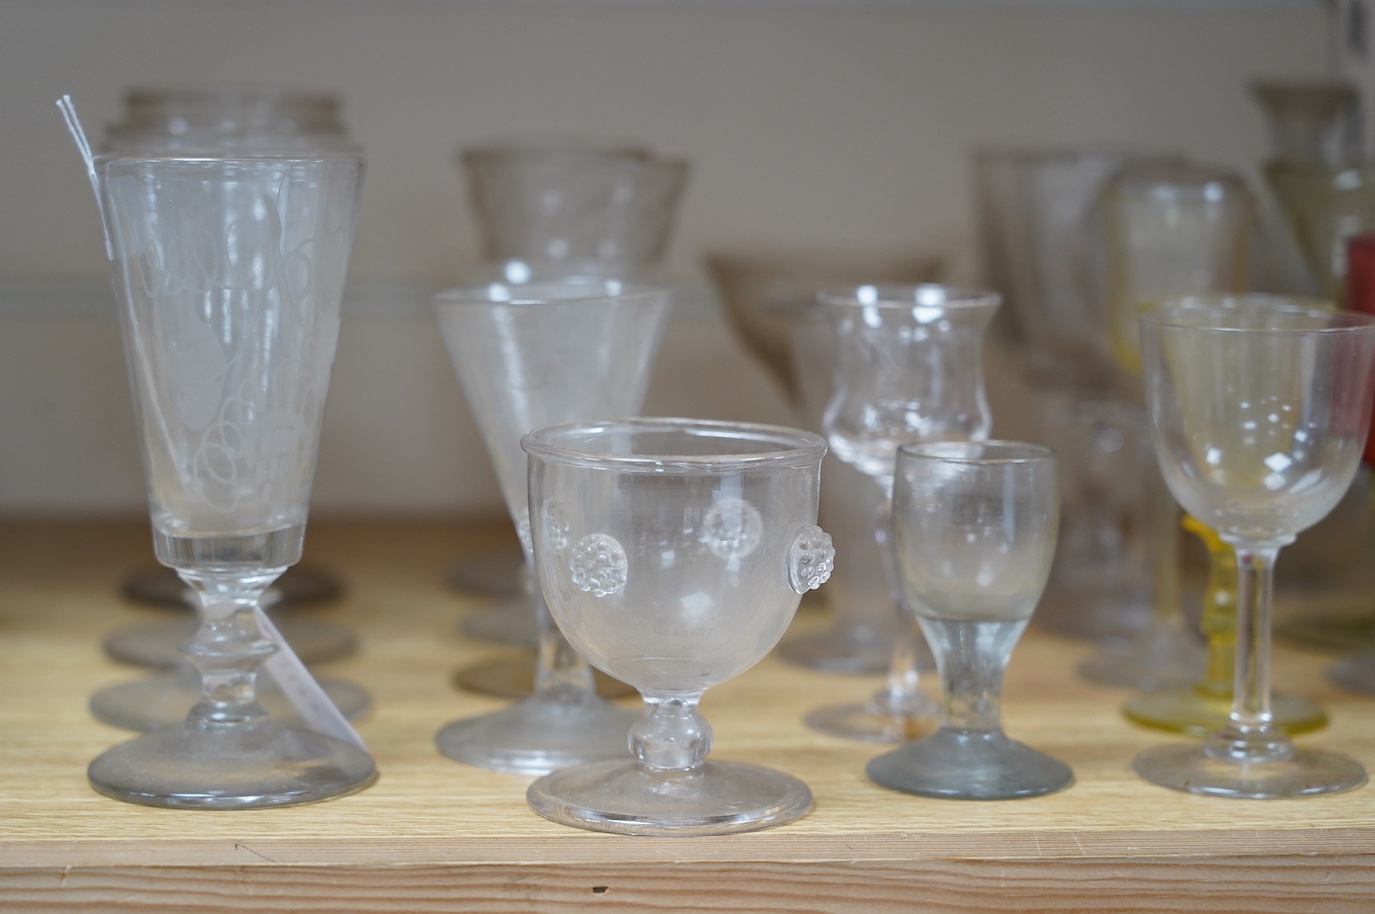 A large cut glass centrepiece, 26cm high, a pair of cut glass decanters and a collection of small glasses from 18th to 20th century. Condition - fair, difficult to see damage as most items need a thorough wash